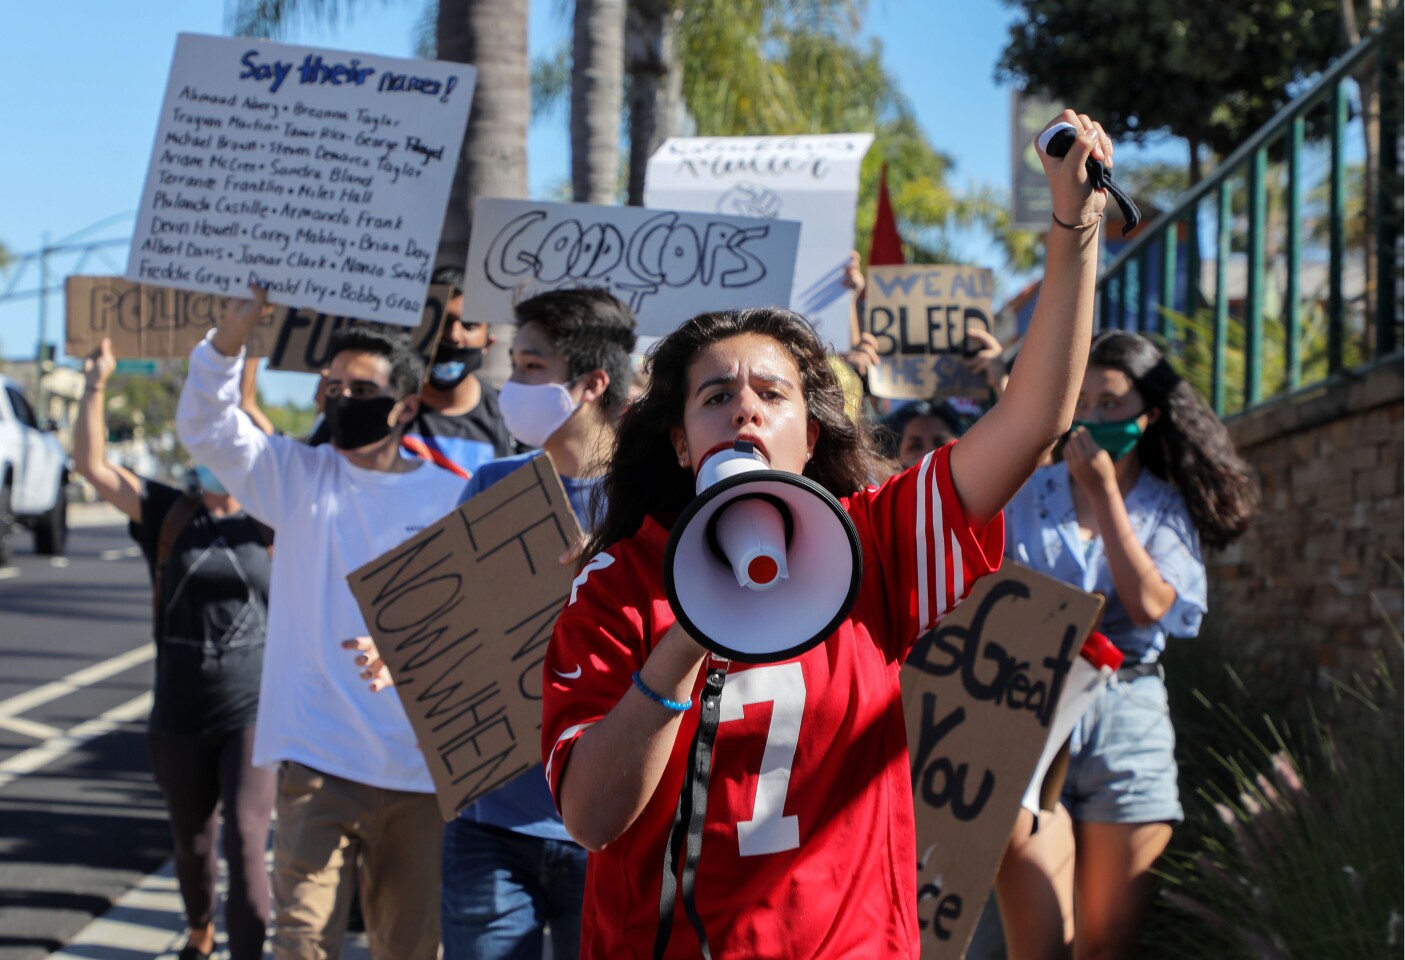 June 9, 2020_Encinitas, California, USA_| Martha Contreras speaks into a bullhorn as she leads a late afternoon Black Lives Matter protest north on Coast Highway 101. |_Photo Credit: Photo by Charlie Neuman